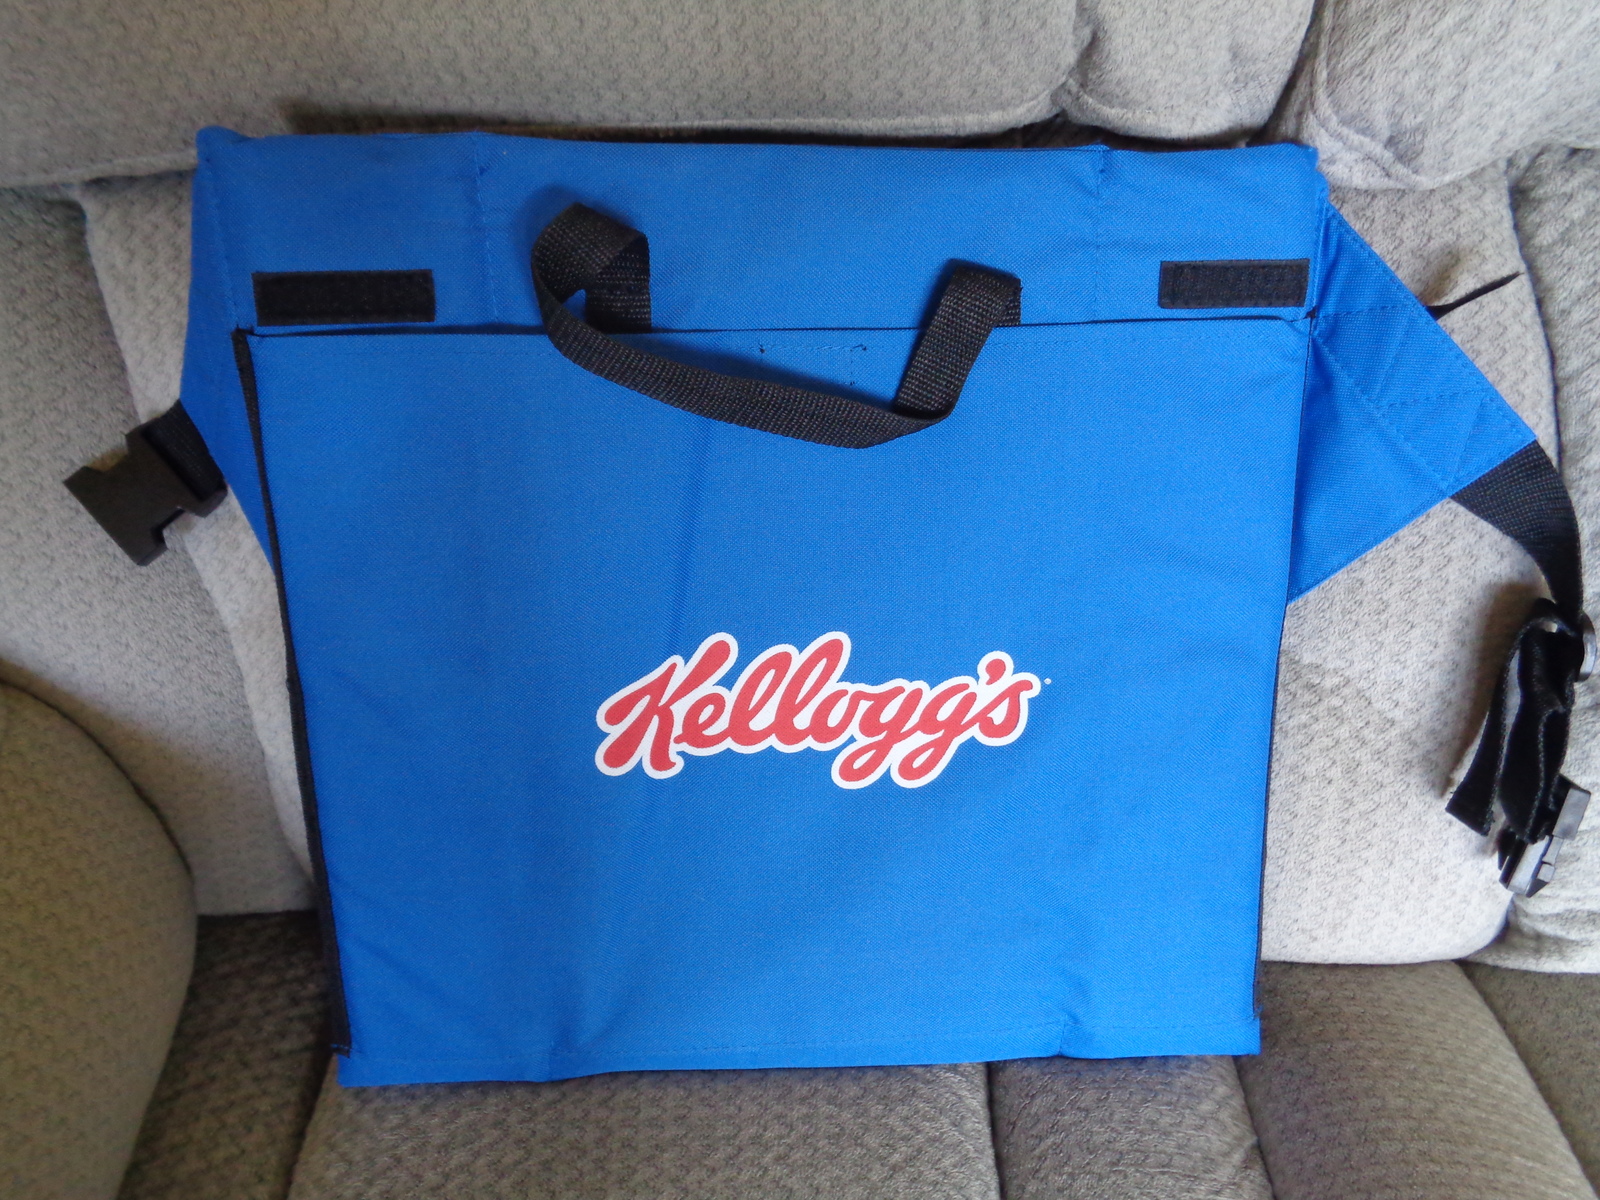 Primary image for Kellogg's Stadium Padded Seat Cushion Blue and Red Cushioning for your Chair